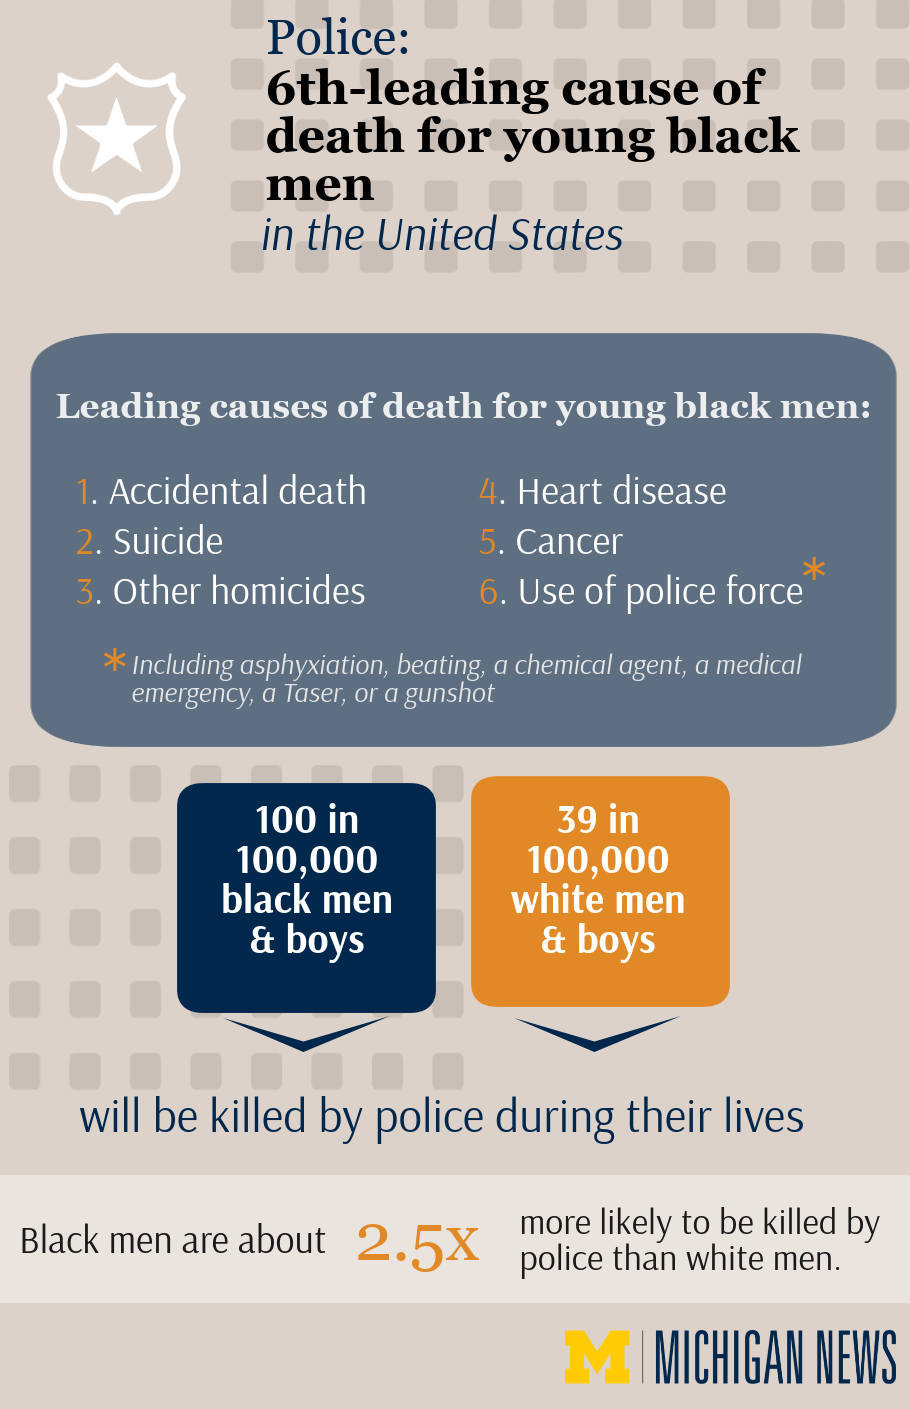 police-sixth-leading-cause-of-death-for-young-black-men.png